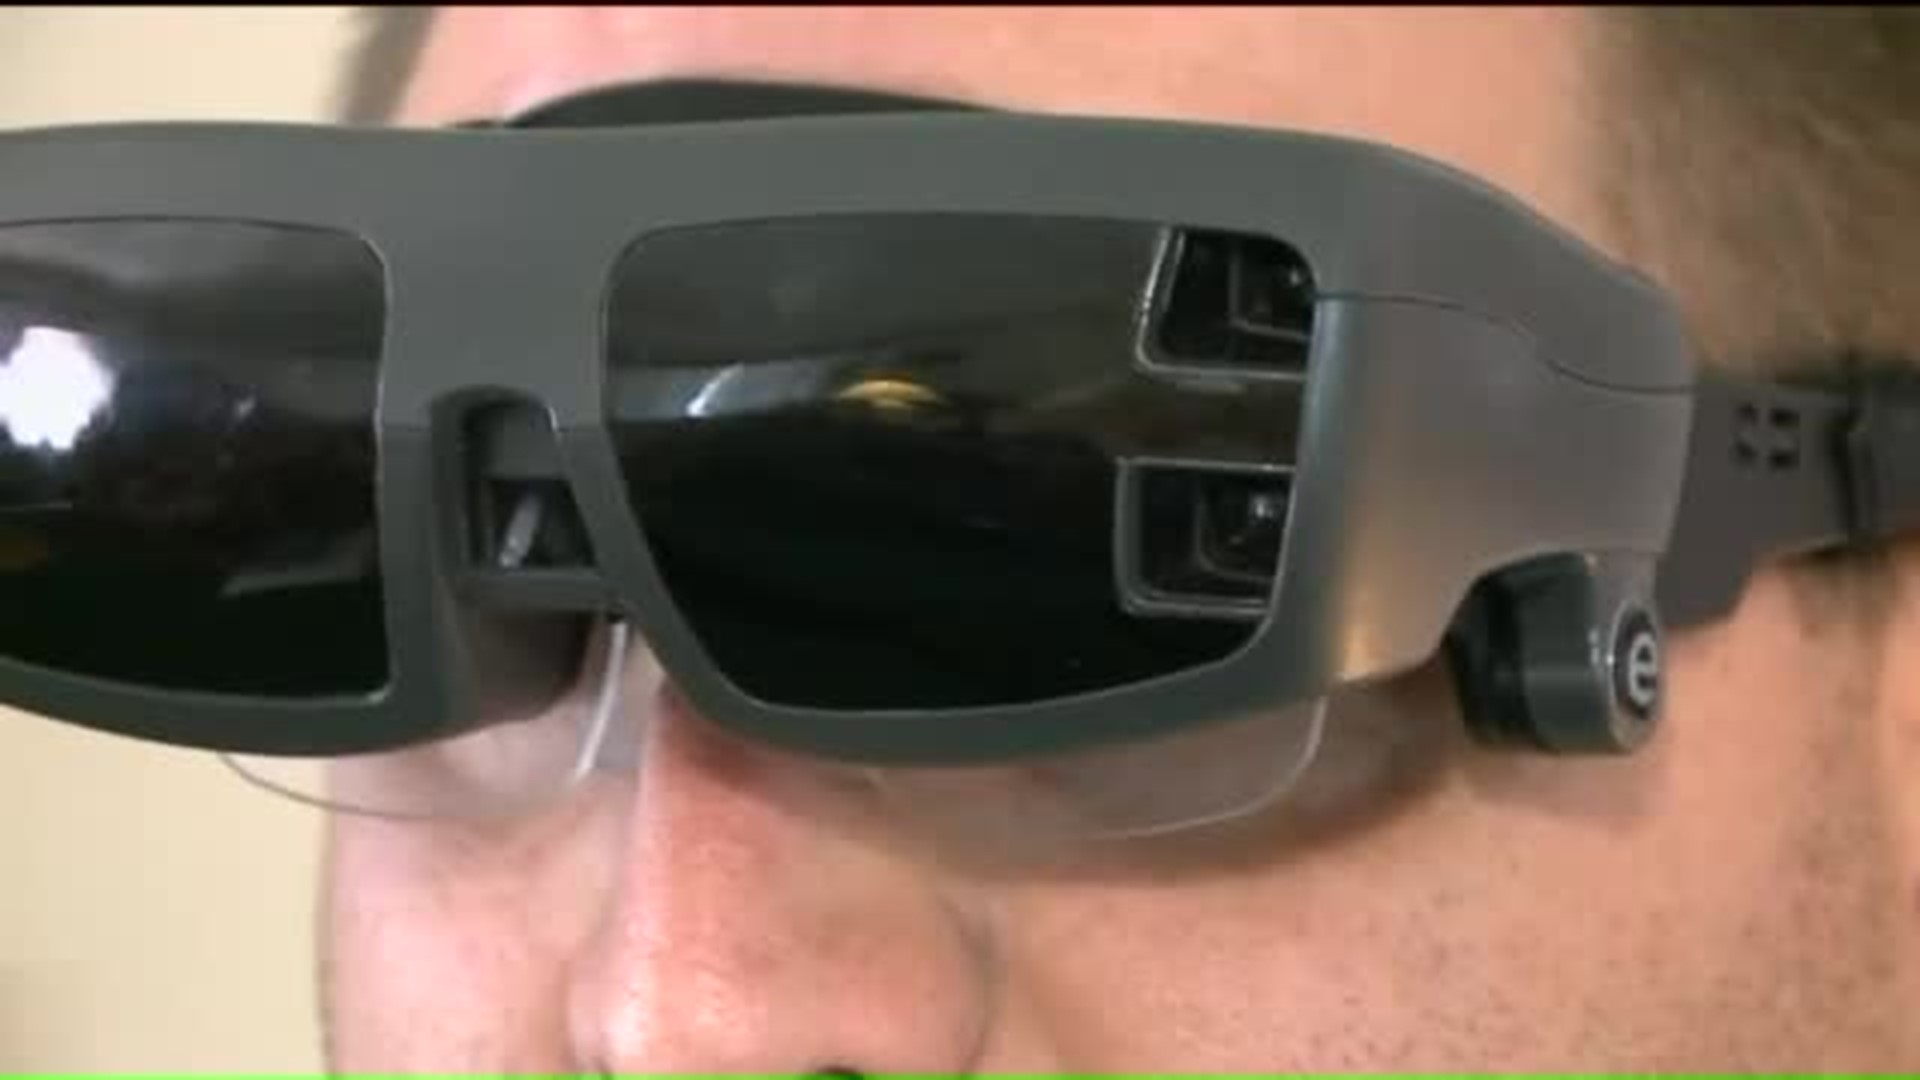 E-Glasses Help People Who Are Legally Blind